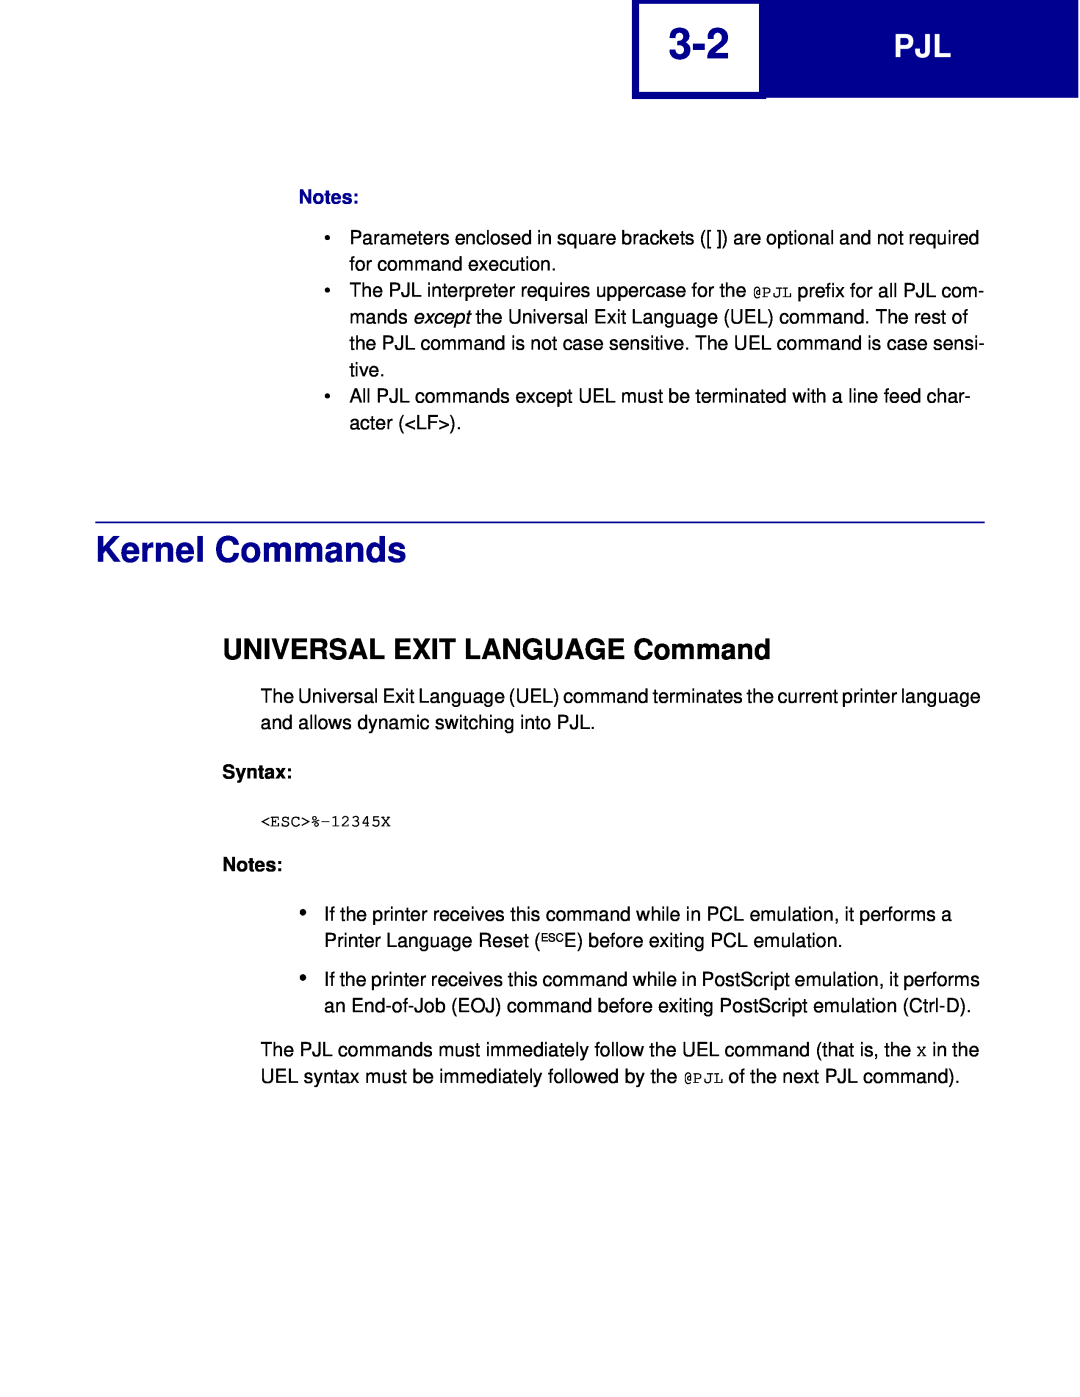 Lexmark C762, C760 manual Kernel Commands, UNIVERSAL EXIT LANGUAGE Command, Syntax 